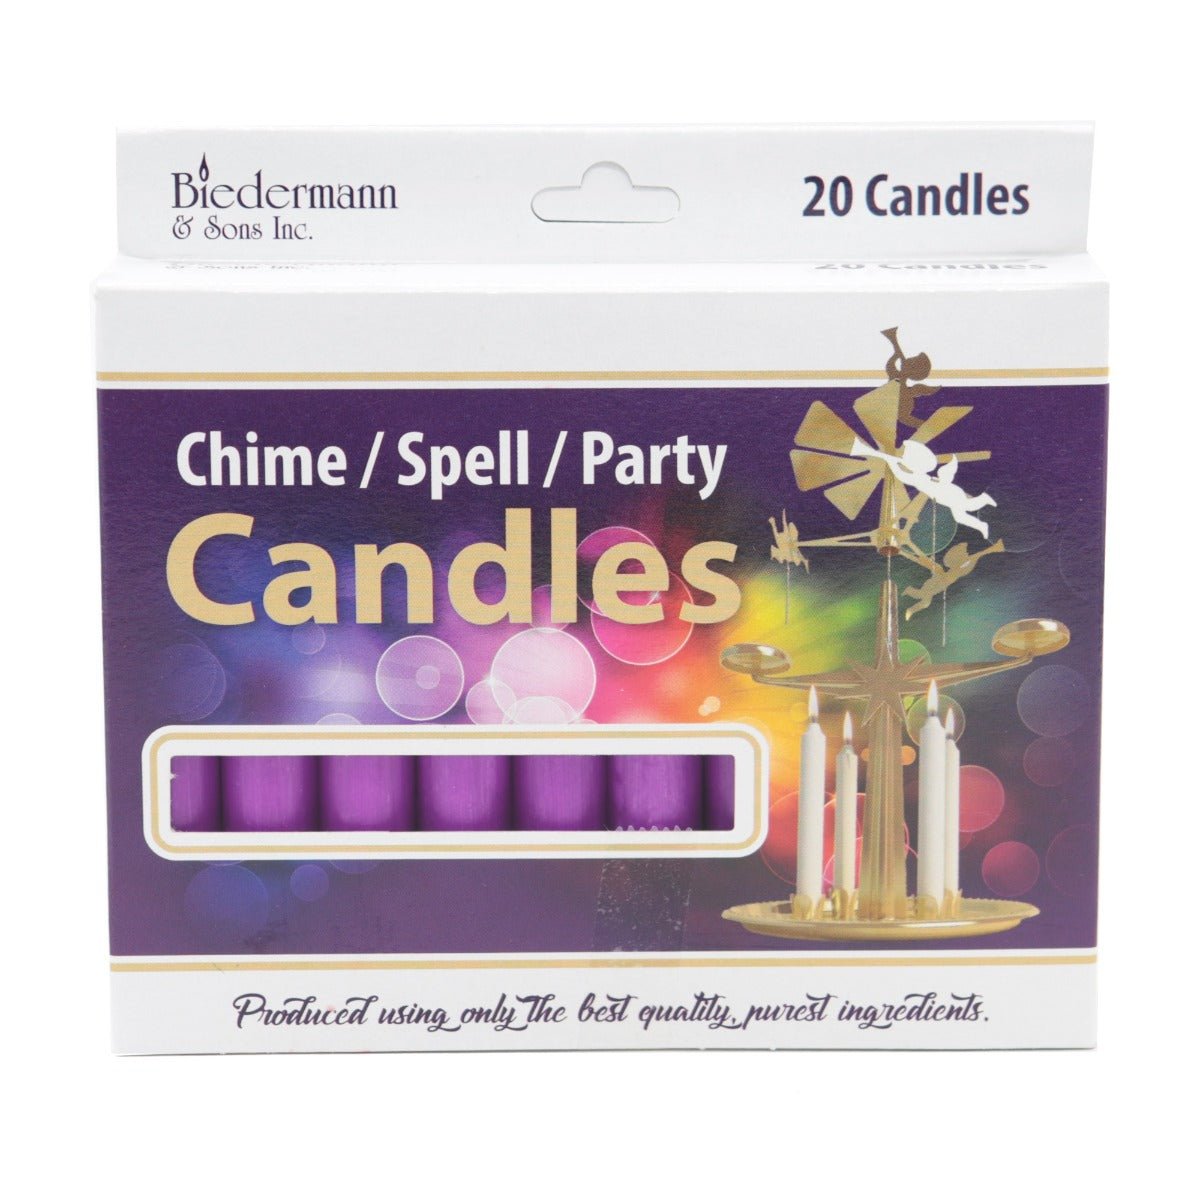 Chime Candle Purple Box - 13 Moons